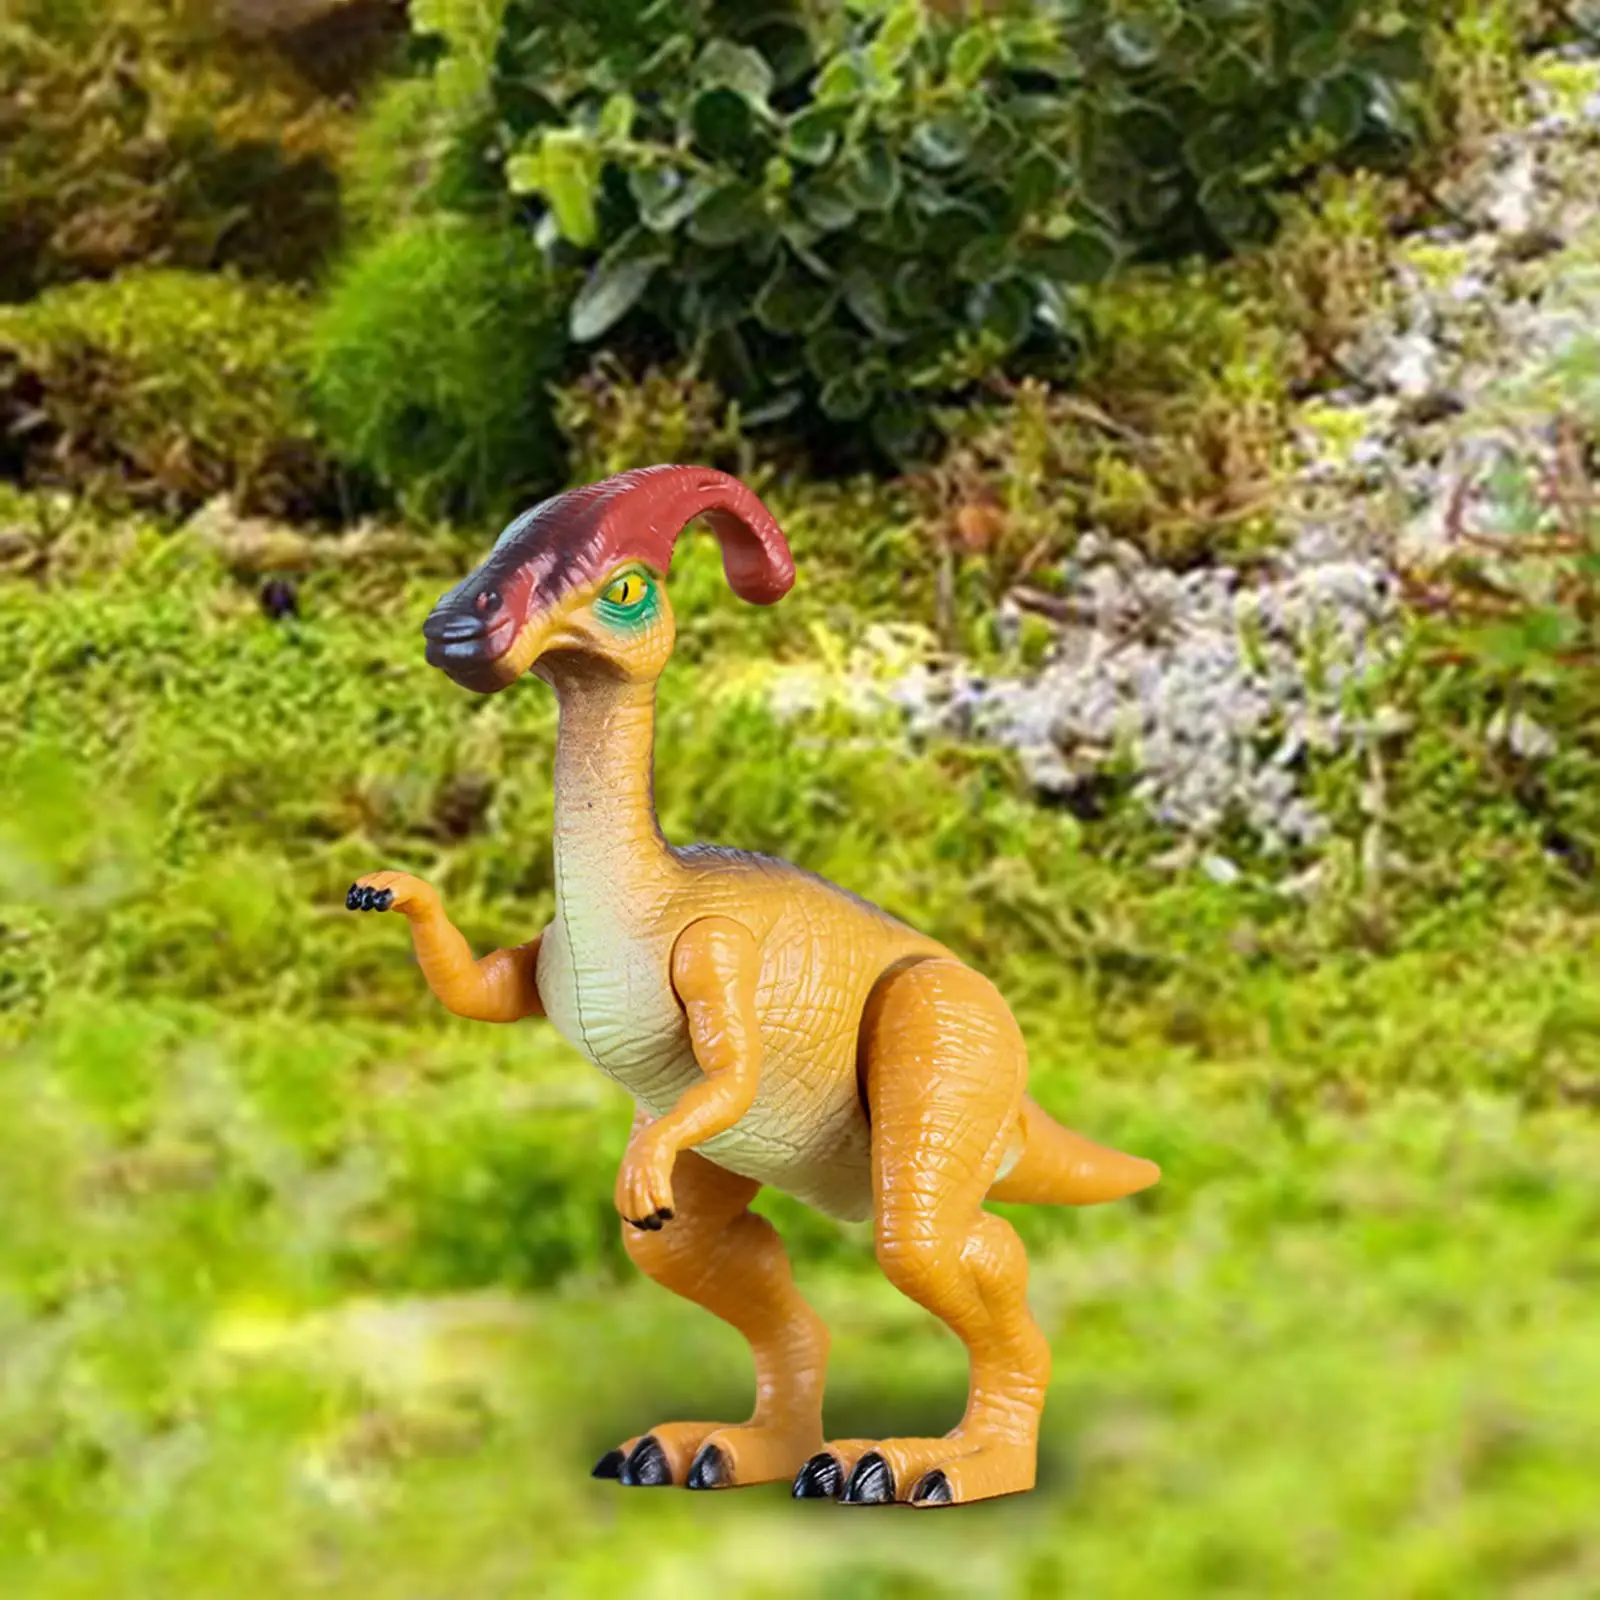 Dinosaur Figure Toy Simulated Dinosaur Toy Collections Realistic Animal Figurine Model Movable Joints for Pretend Play